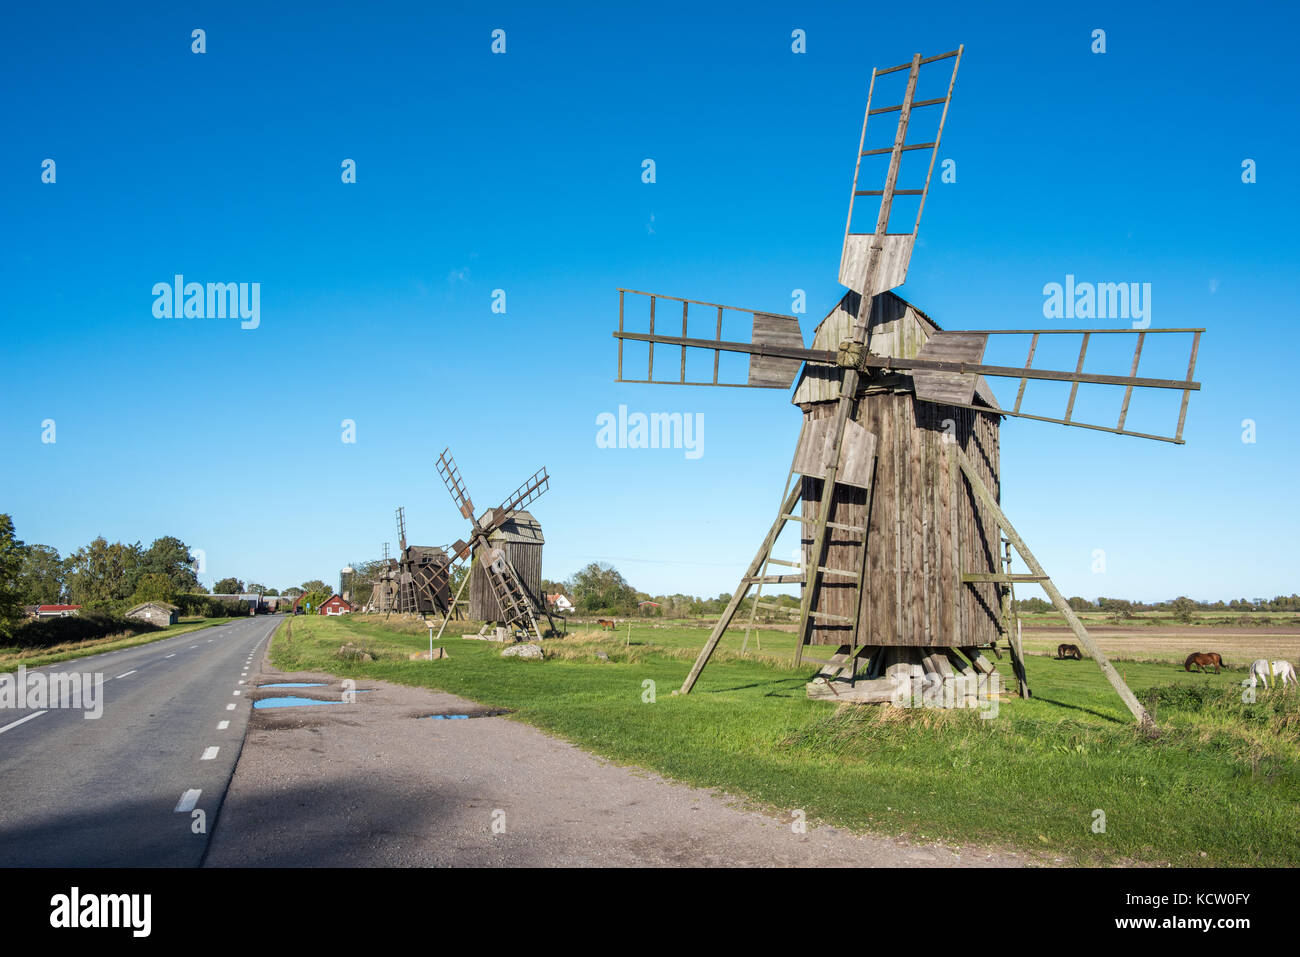 Traditional windmills at Lerkaka on Swedish island Oland in the Baltic Sea. Windmills are a common sight on Oland. Stock Photo